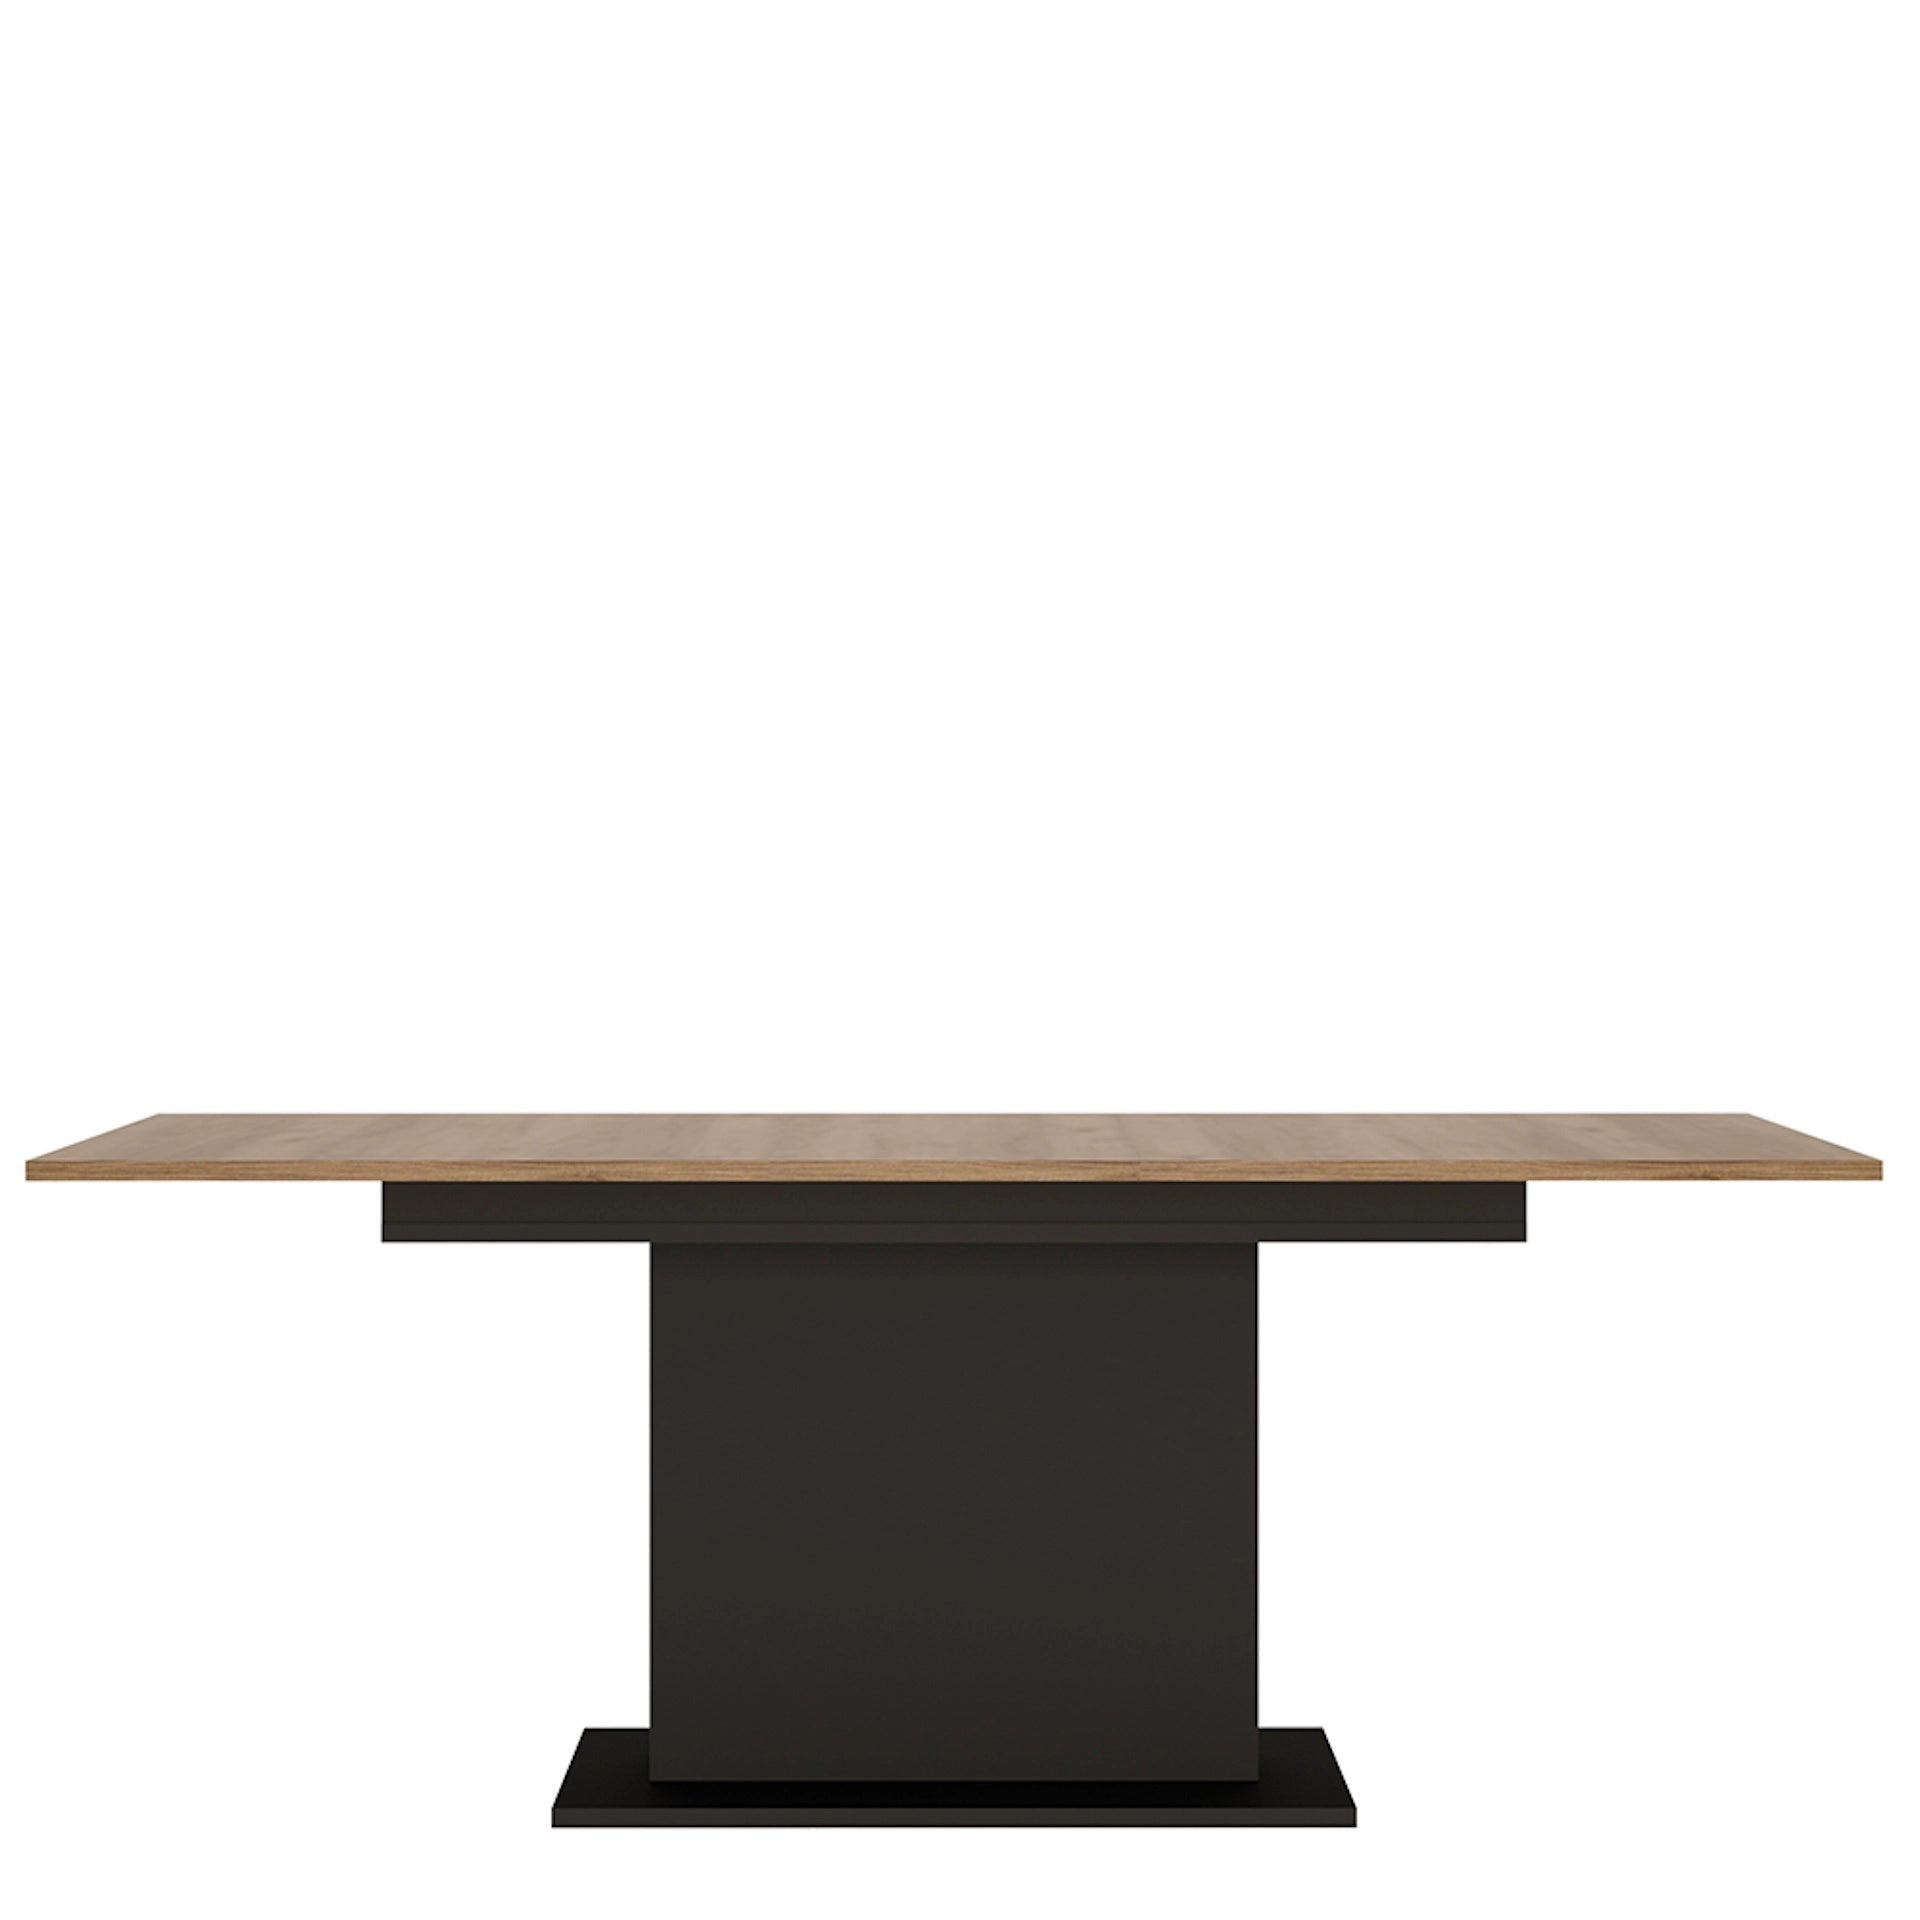 Furniture To Go Brolo Extending Dining Table in Walnut & Black